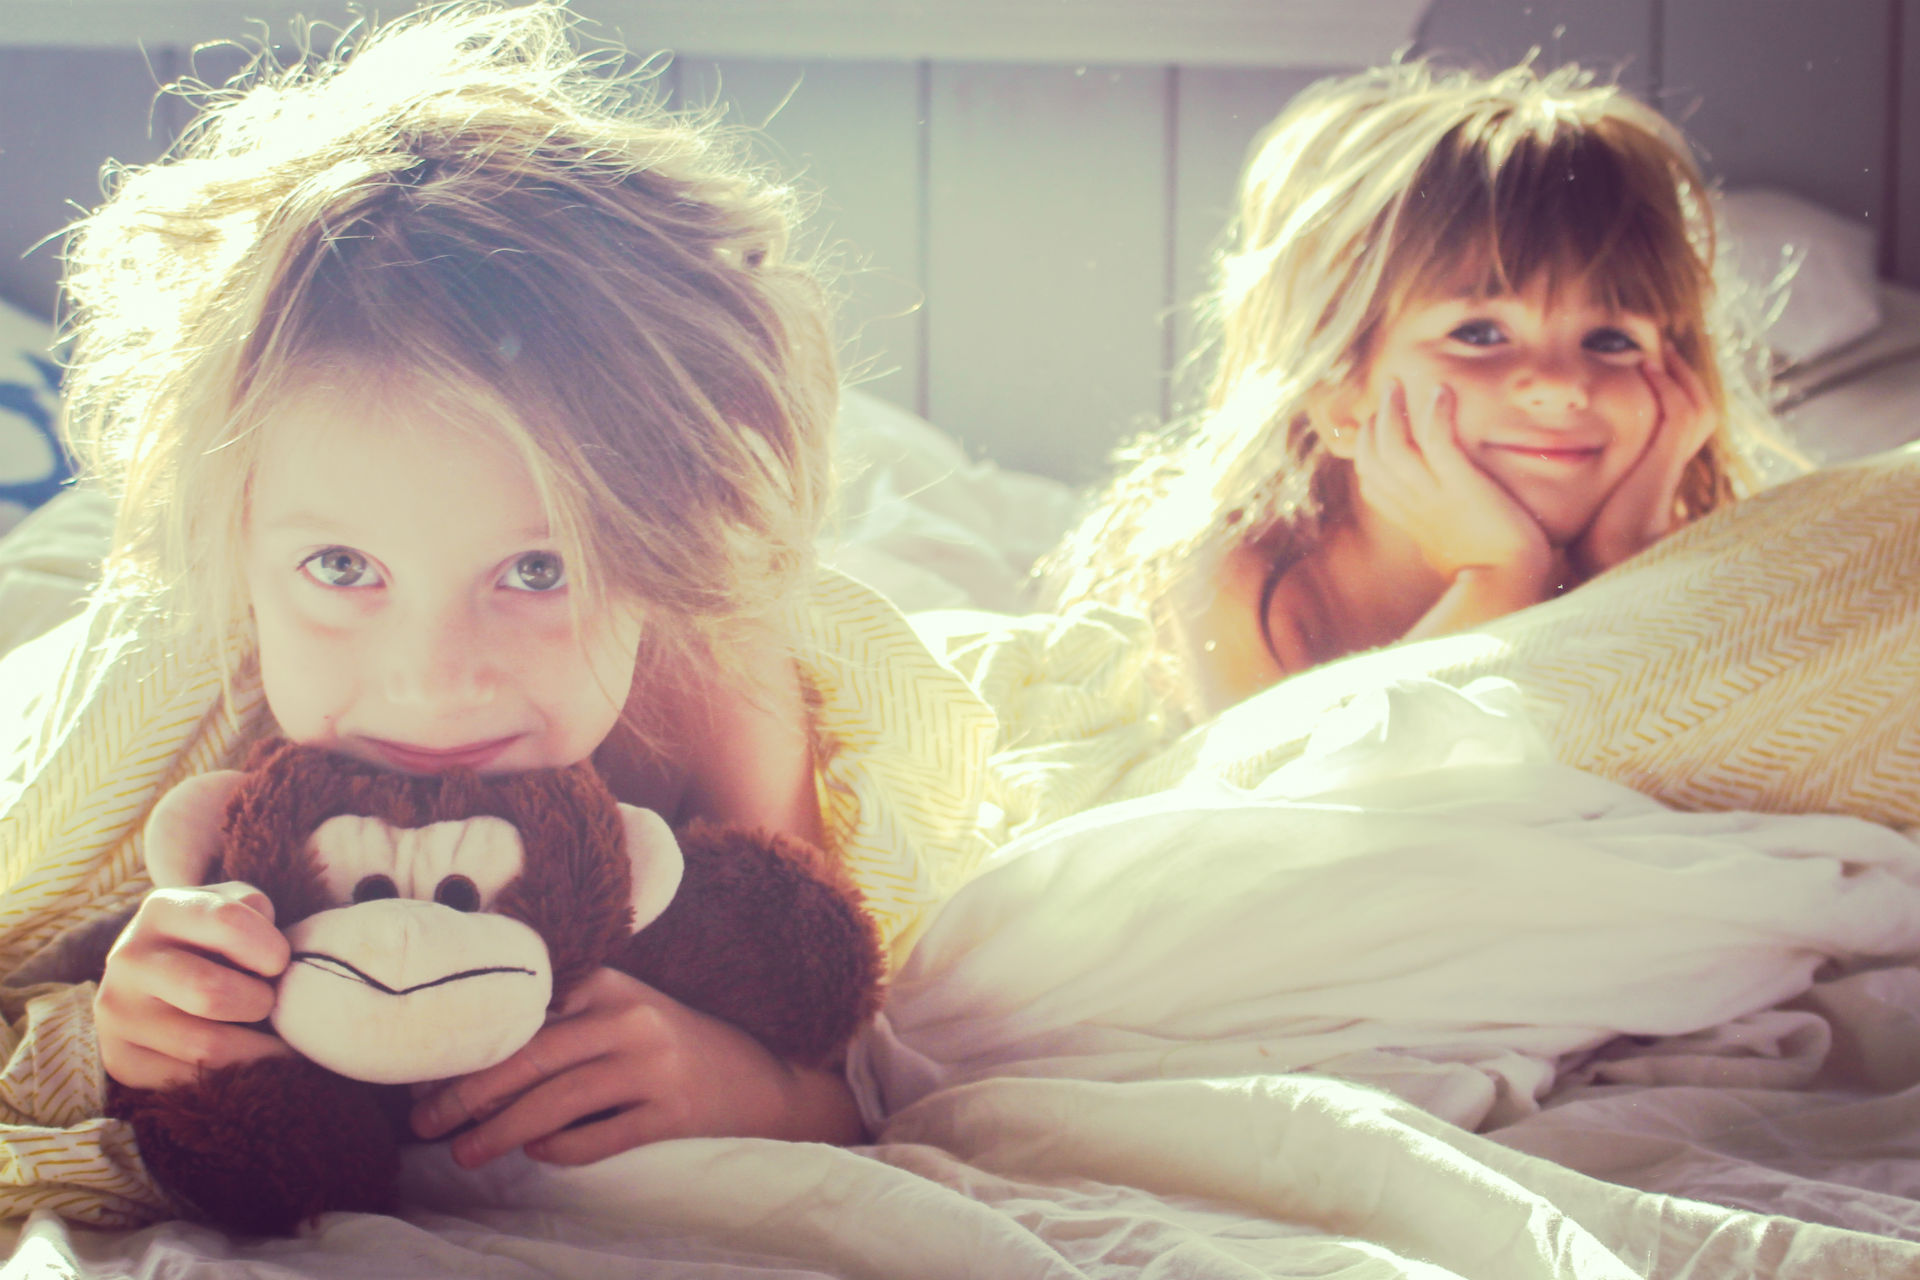 two girls laying in bed, one holding a stuffed monkey